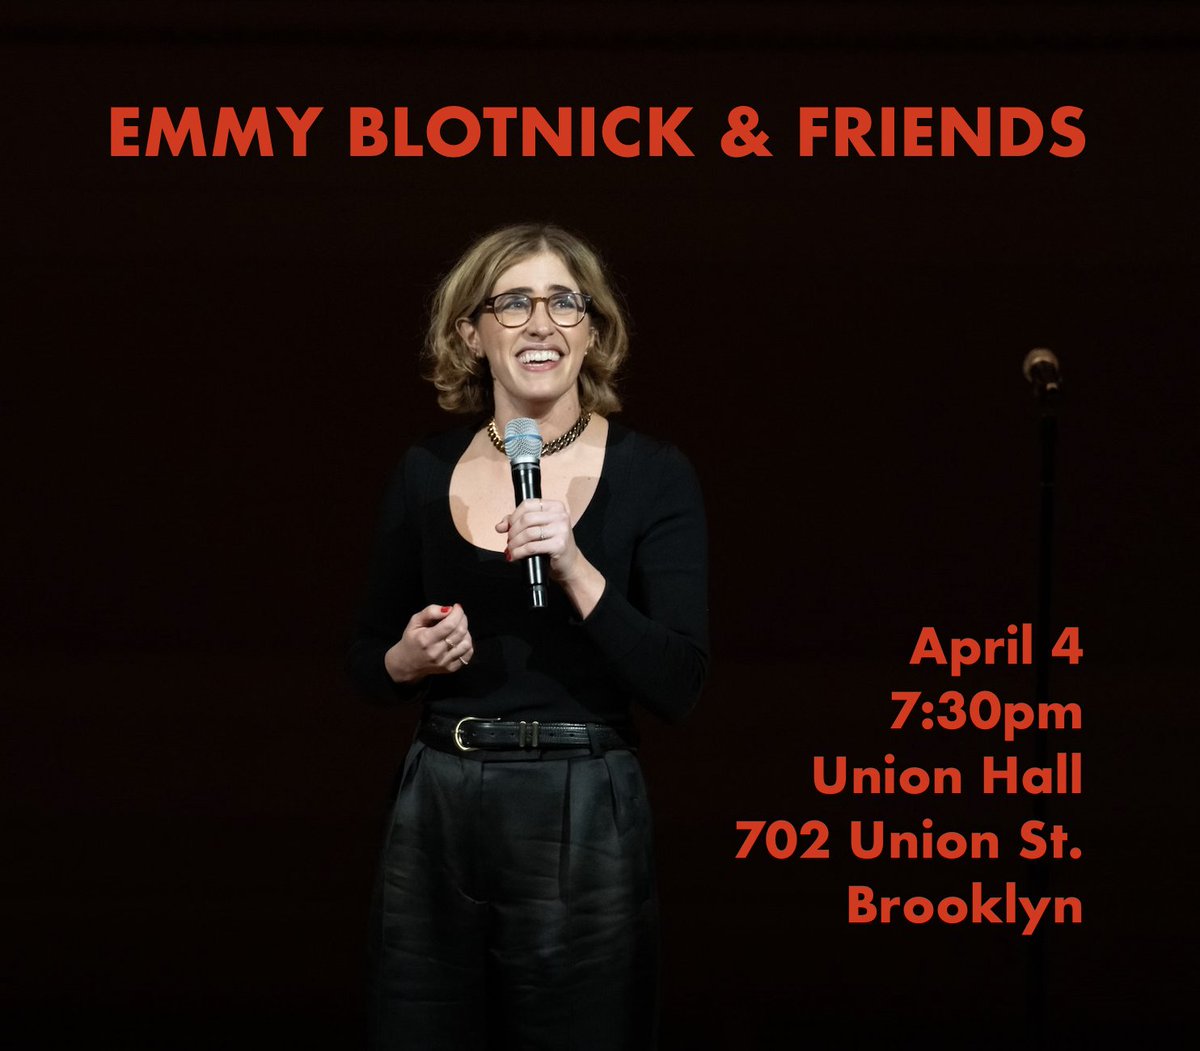 TONIGHT: Emmy Blotnick & Friends✨ @emmyblotnick is workshopping an hour of comedy, and you know who else will be there? FRIENDS! Featuring: ∙ @TonyAtamanuik ∙ @AlisonLeiby ∙ @samttaggart + more! 7PM Doors ∙ 7:30PM Show Tickets & Details: bit.ly/3m2RfJI